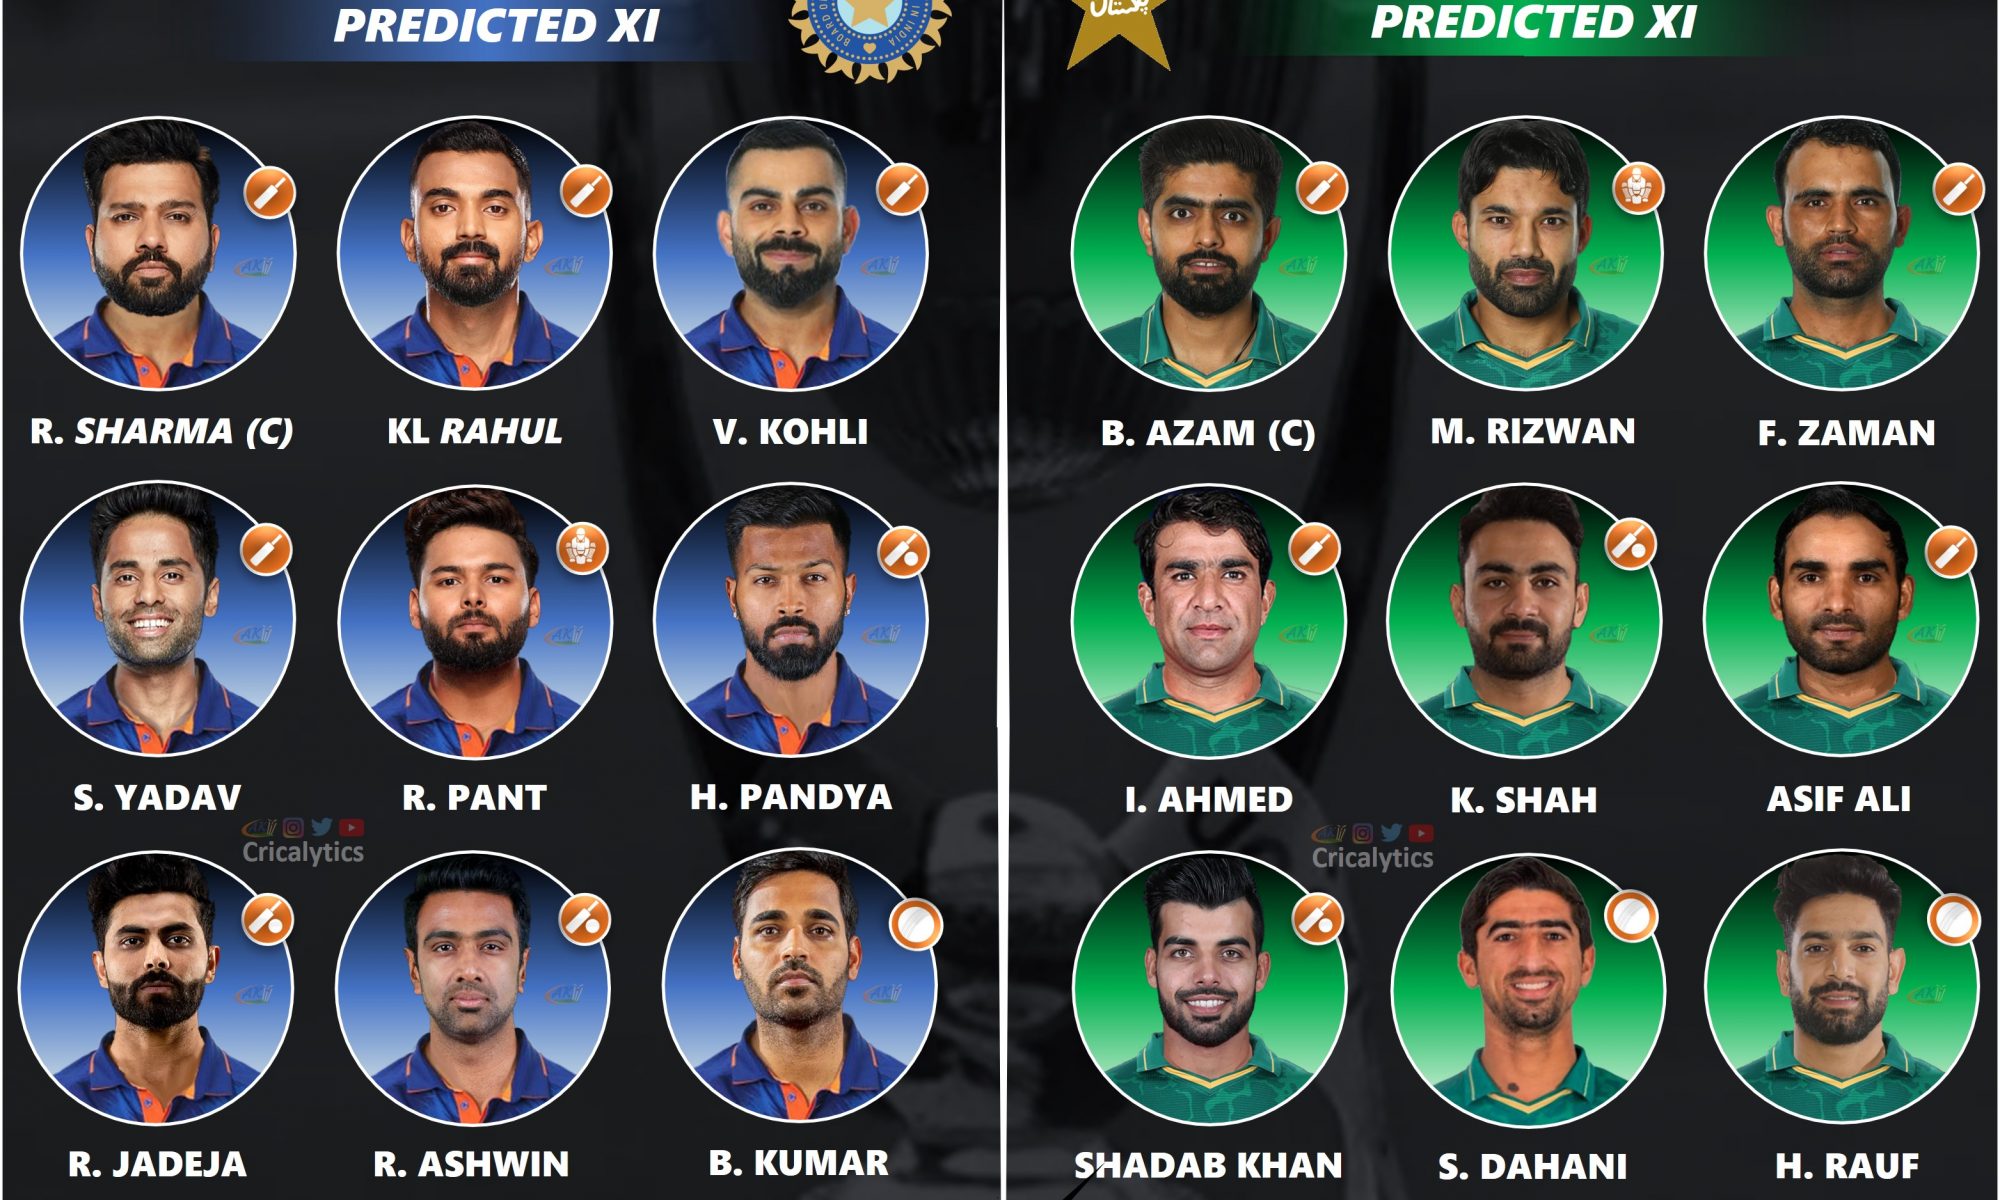 india vs pakistan asia cup 2022 playing 11